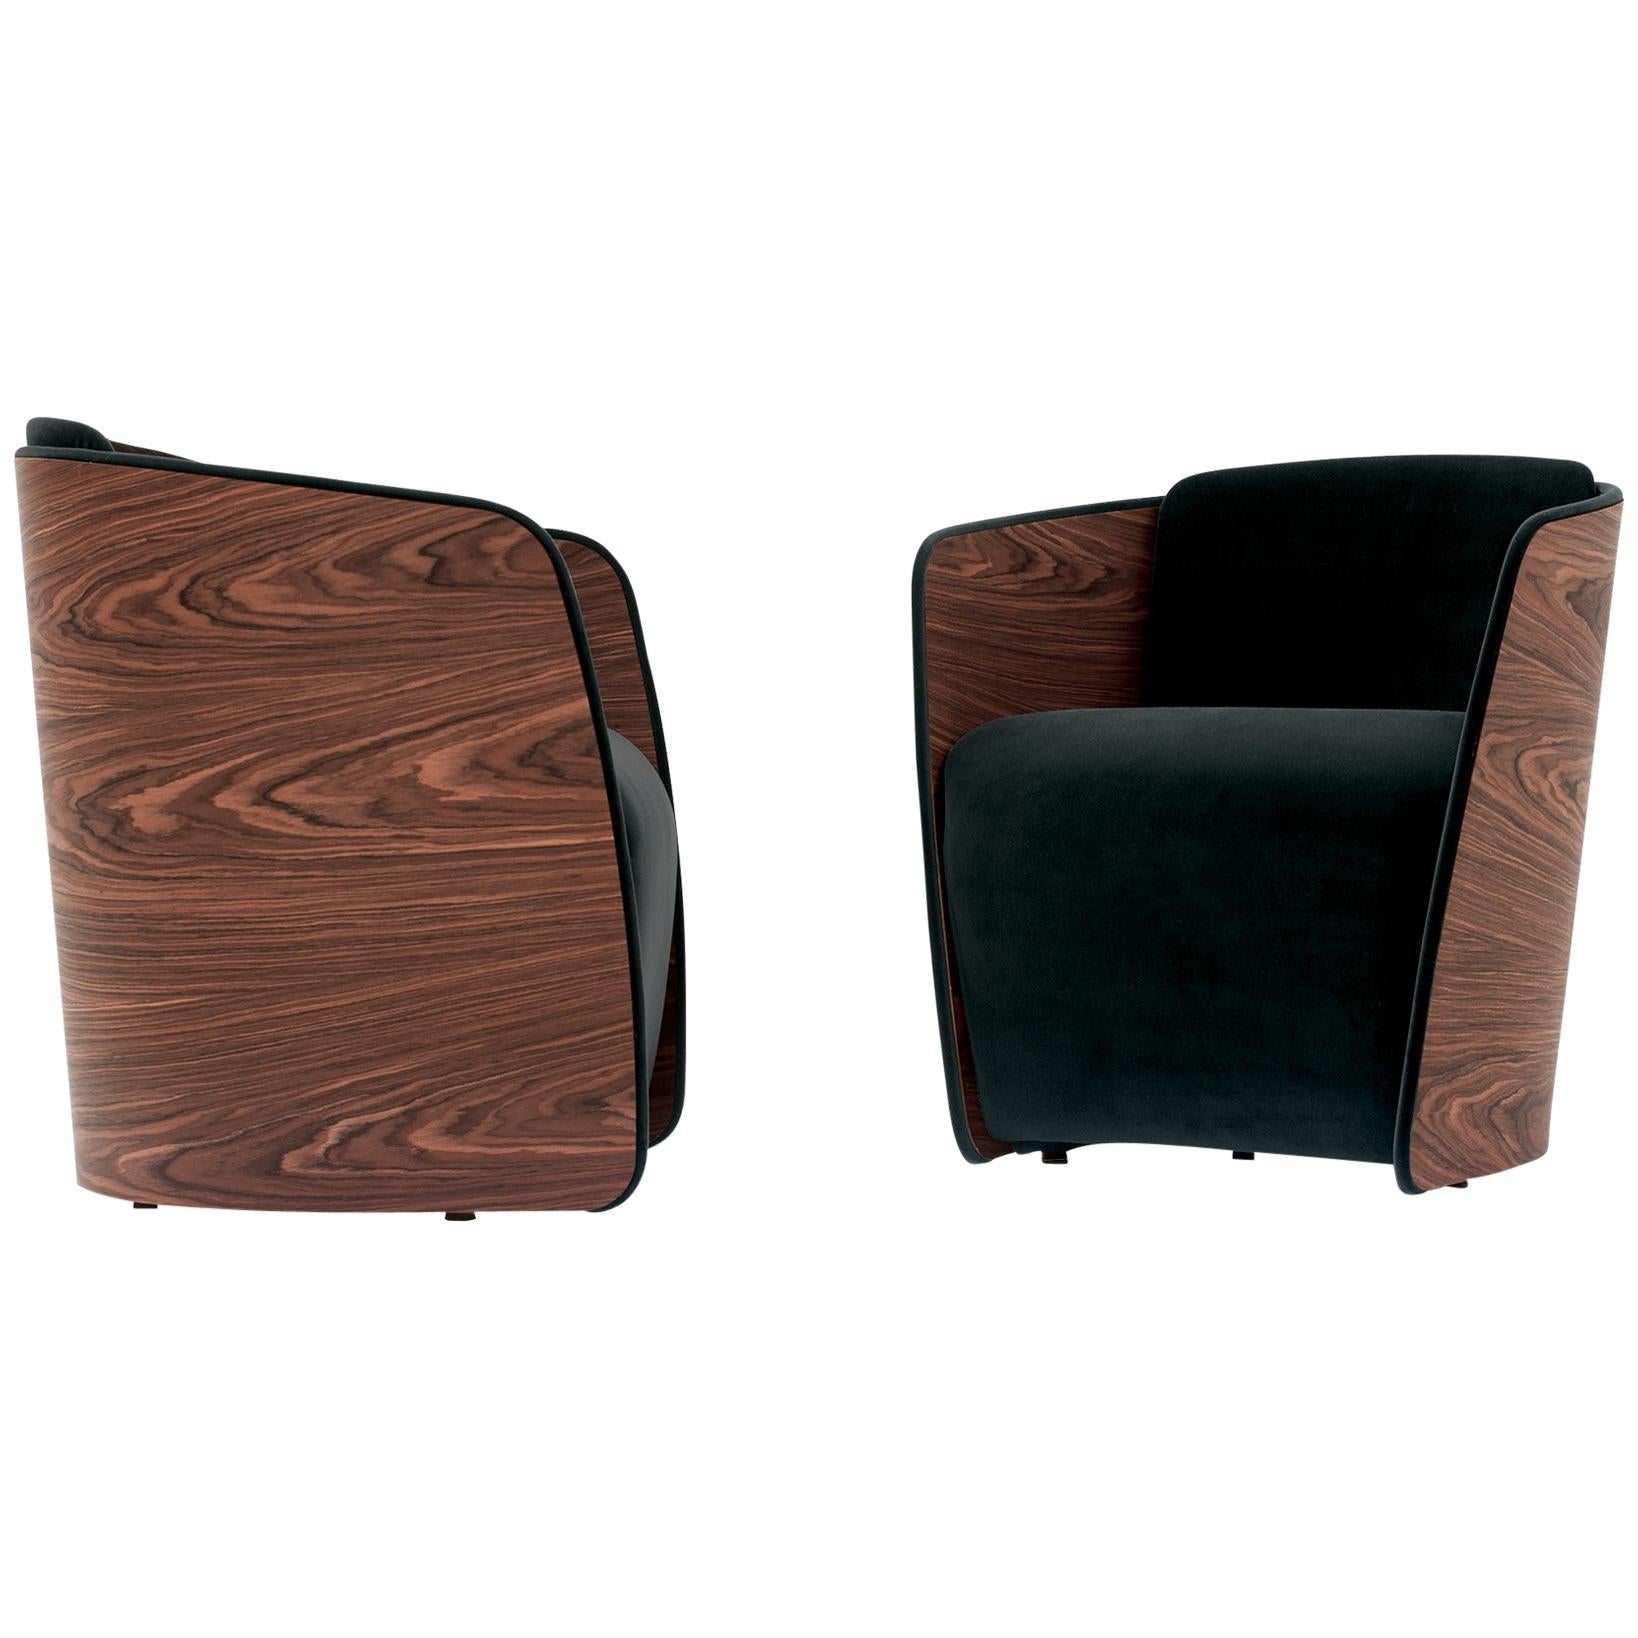 Nube Italia Sir Armchair in Black with Wood Back by Carlo Colombo